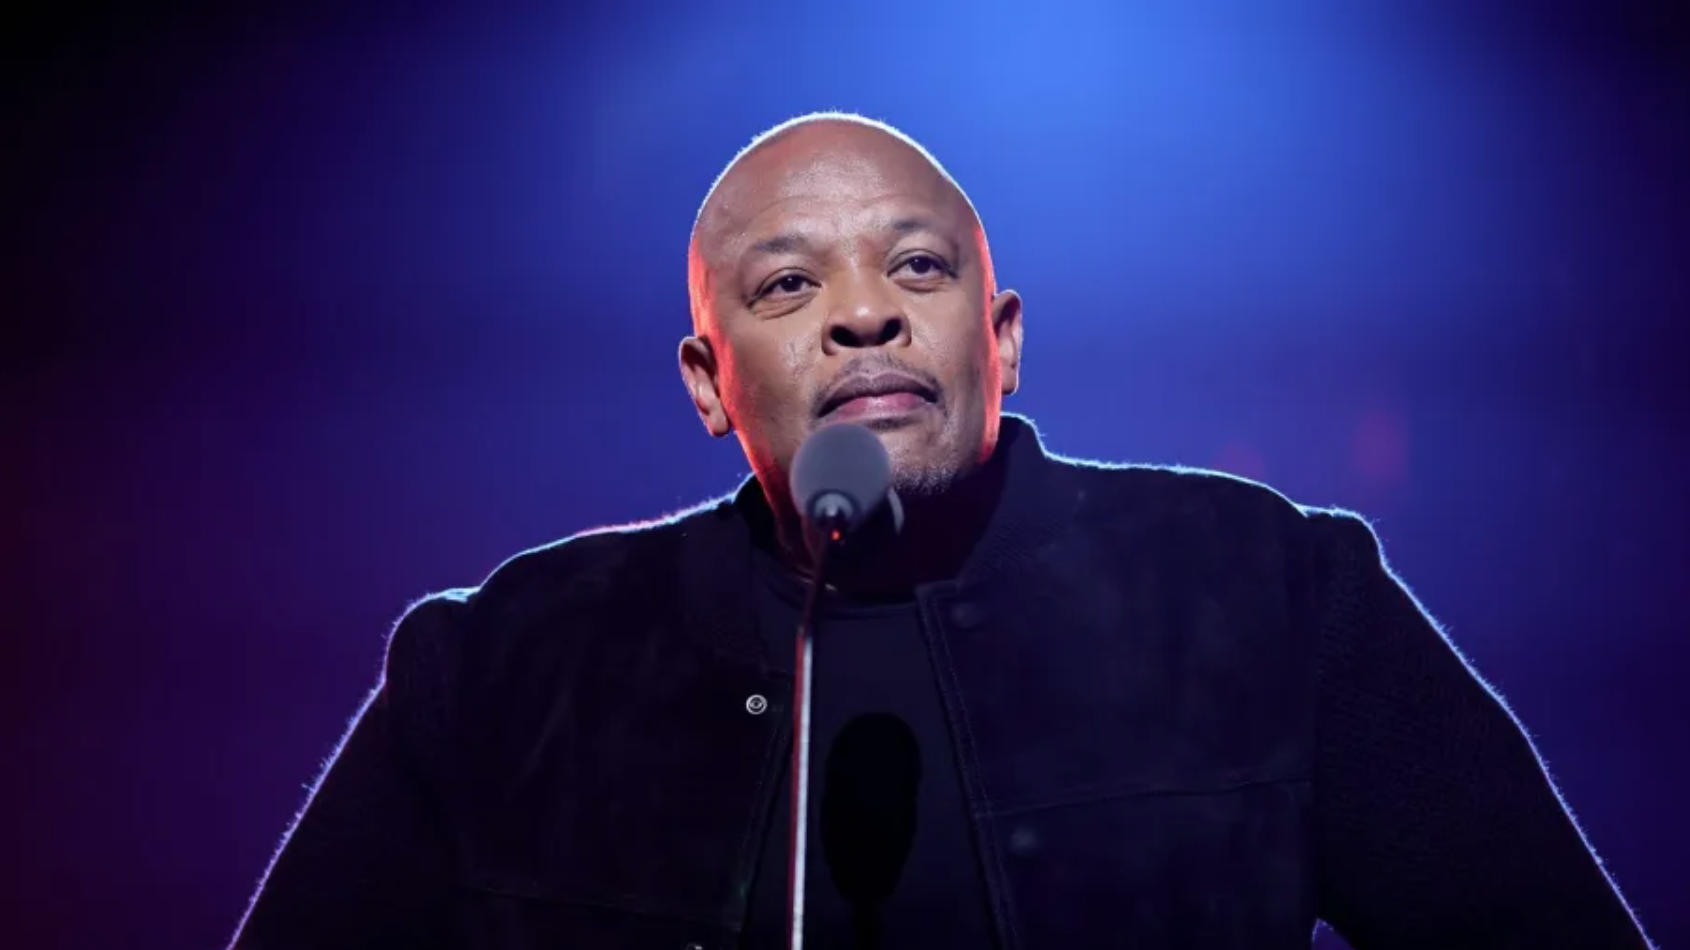 Dr. Dre To Be Honored With ASCAP’s Hip-Hop Icon Award